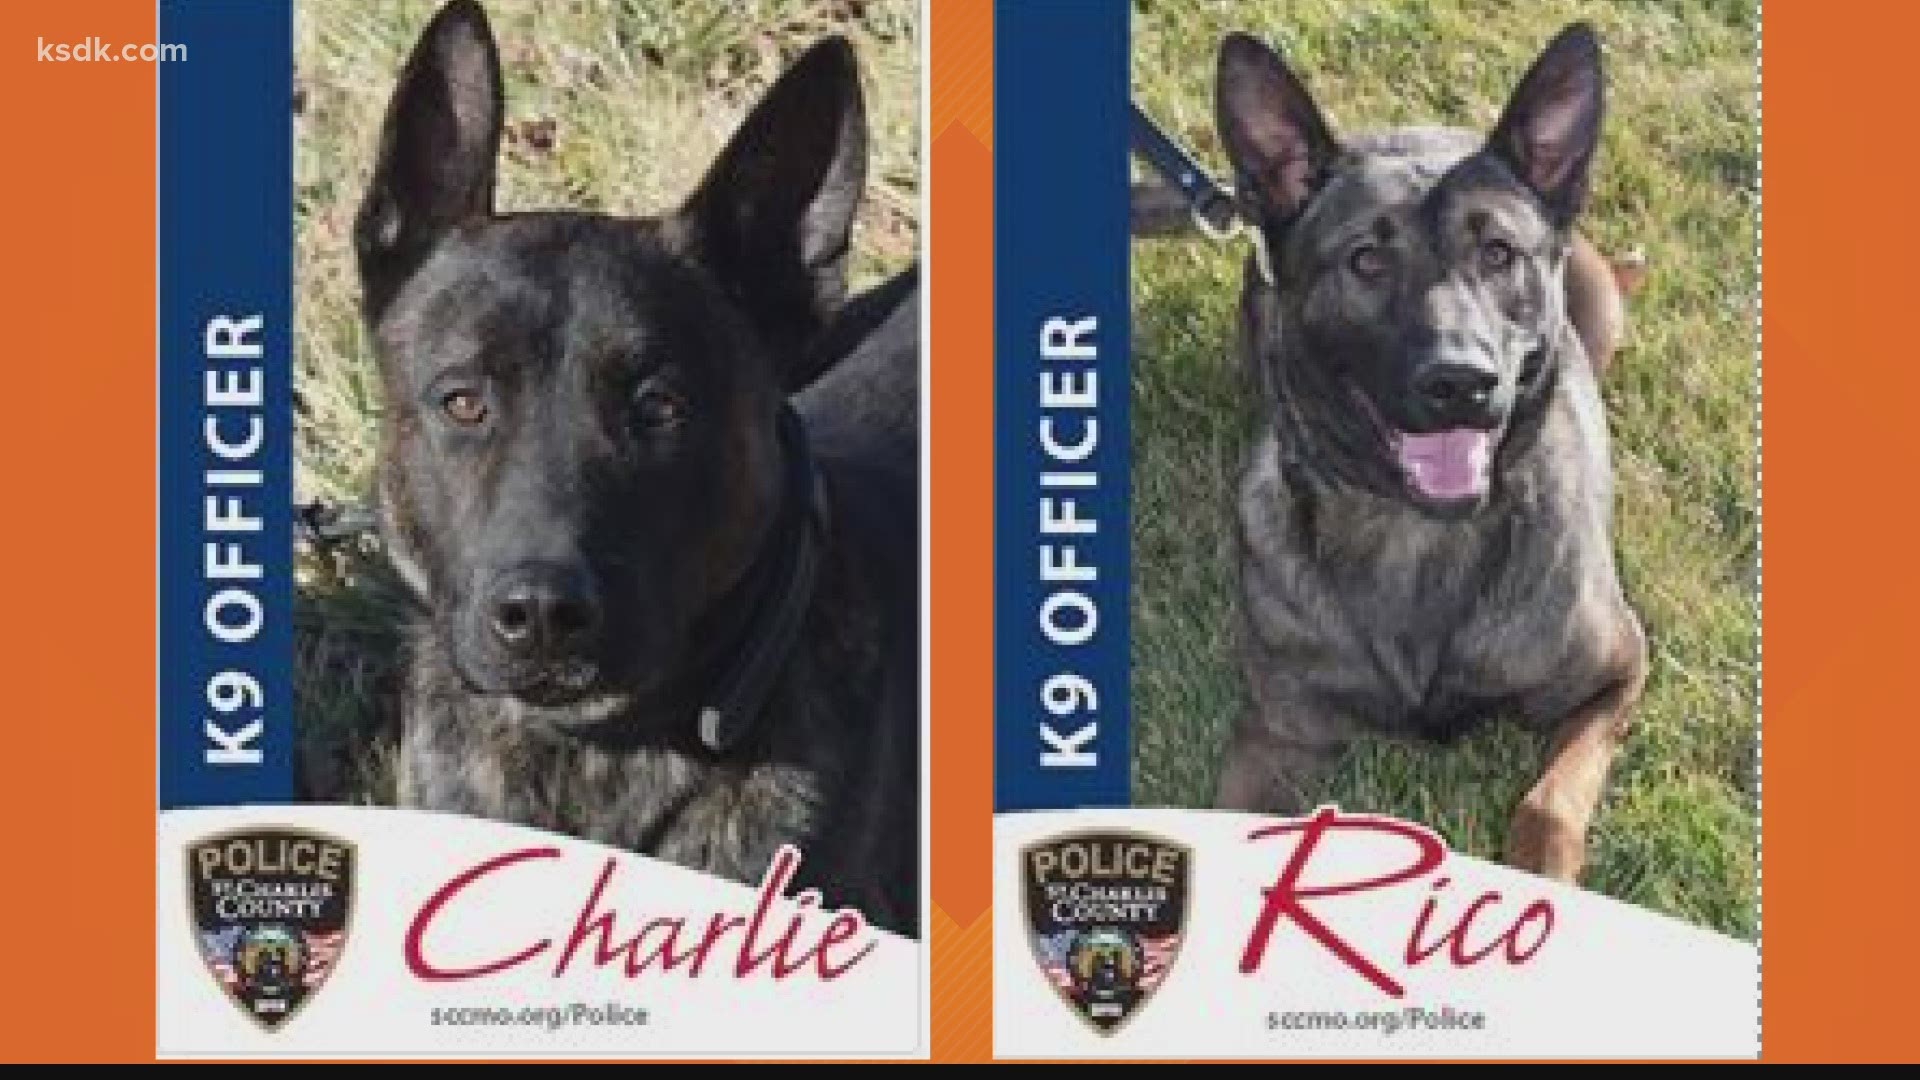 Charlie and Rico both specialize in tracking, narcotic detection and apprehension